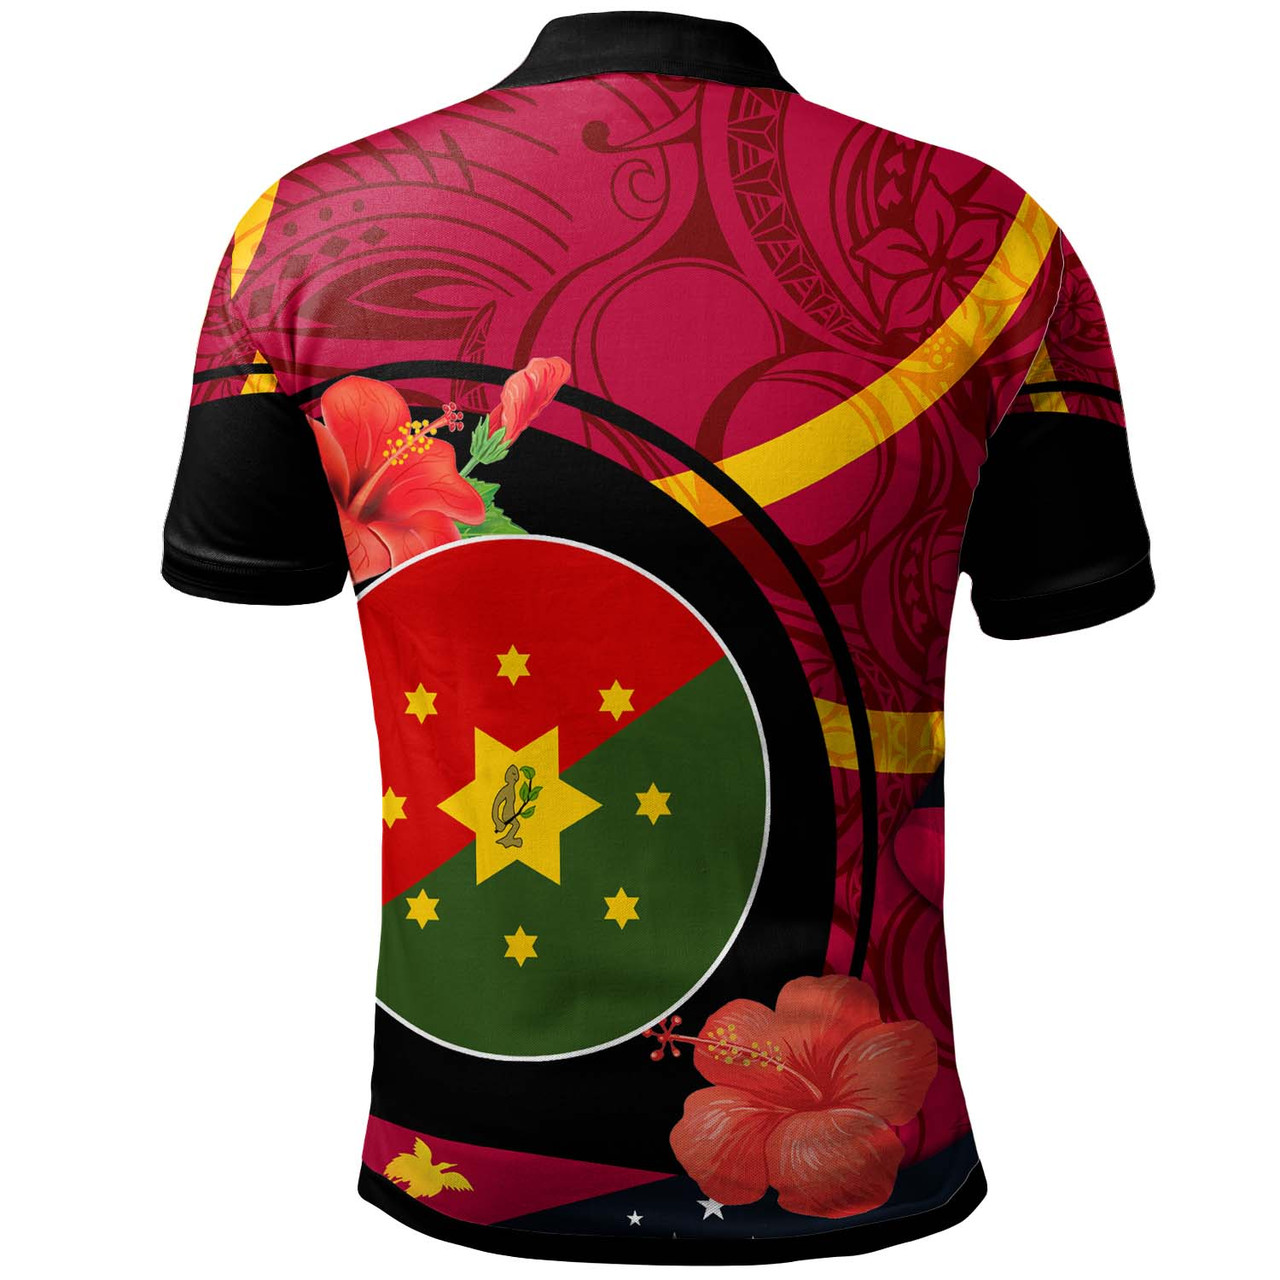 Papua New Guinea Polo Shirt - Eastern Highlands Flag of PNG with Hibicus and Polynesian Culture Polo Shirt